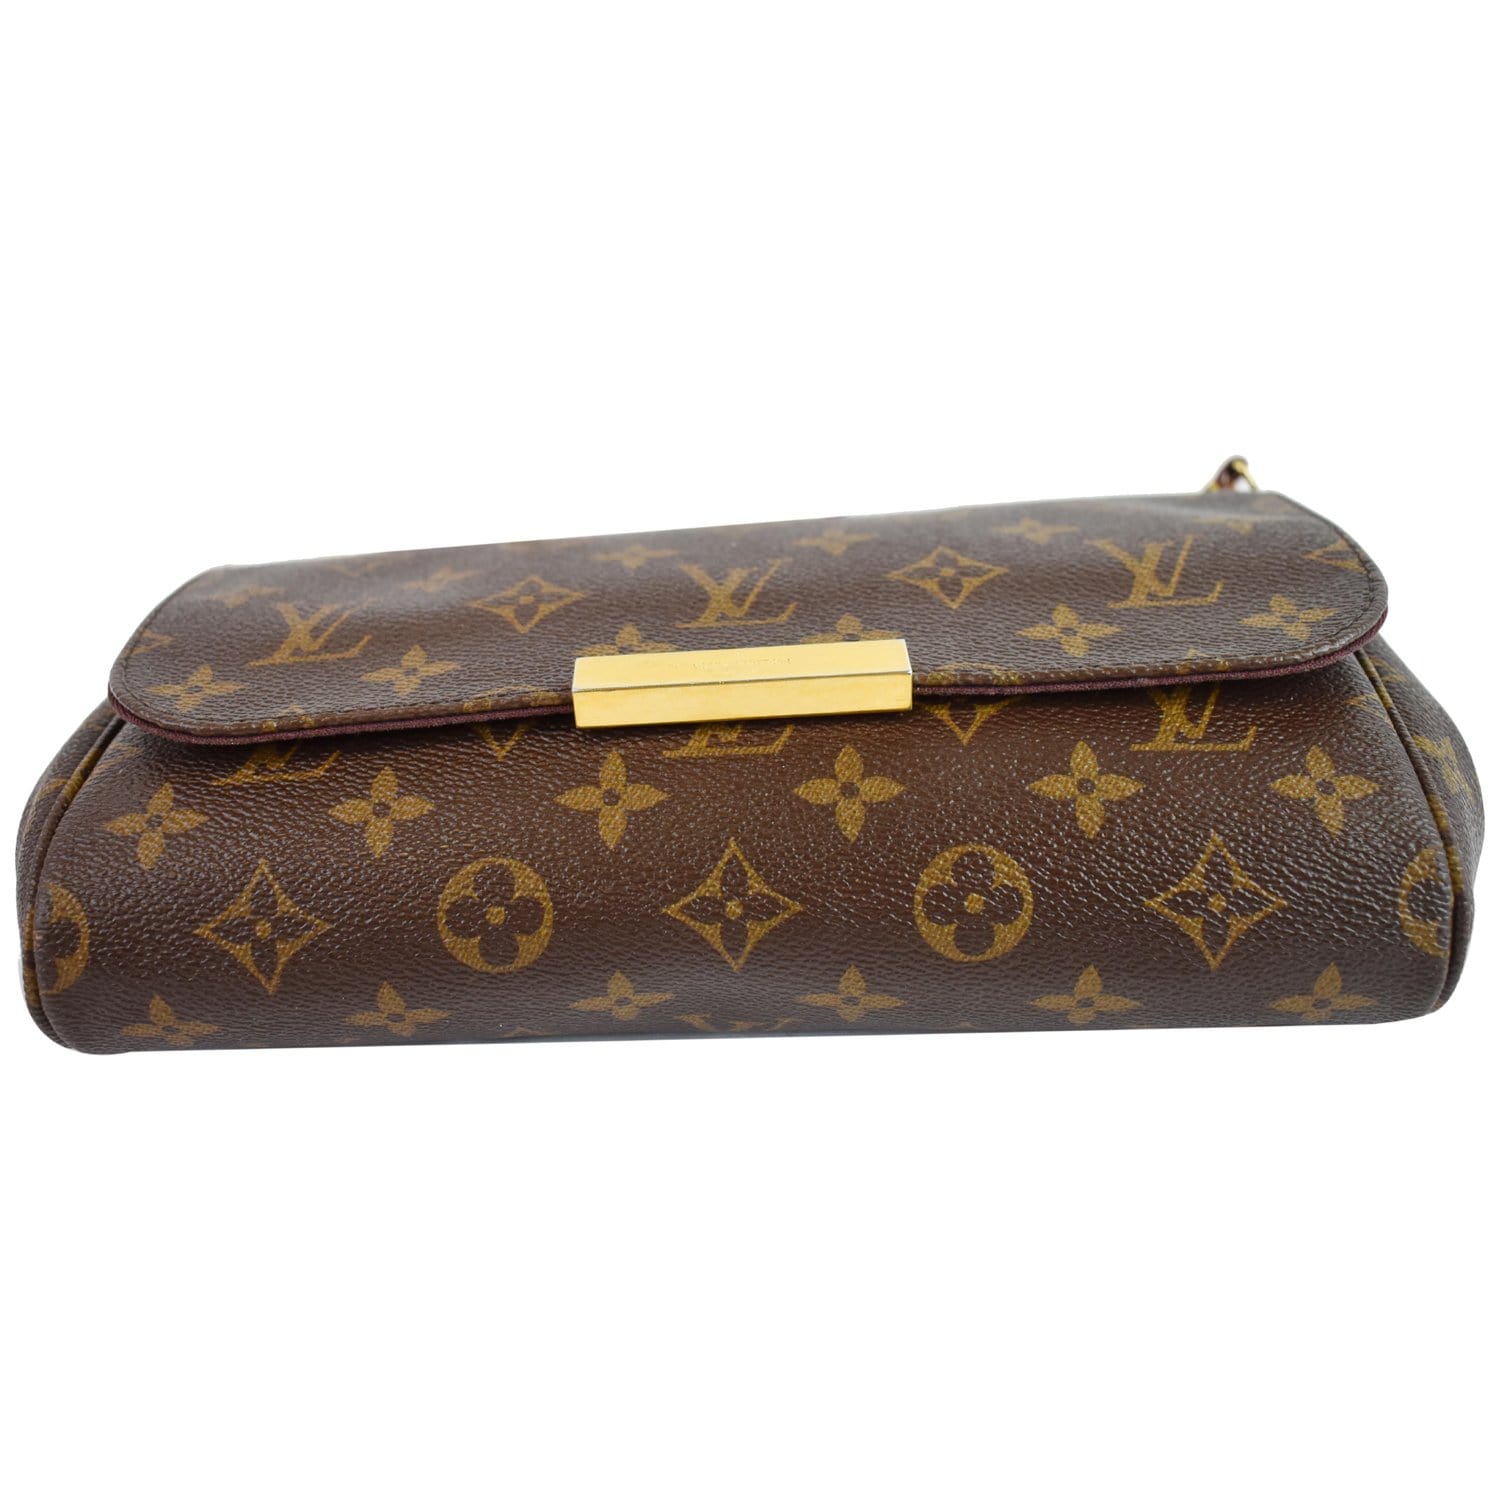 Louis Vuitton: A Nice beautybox of brown monogram canvas with